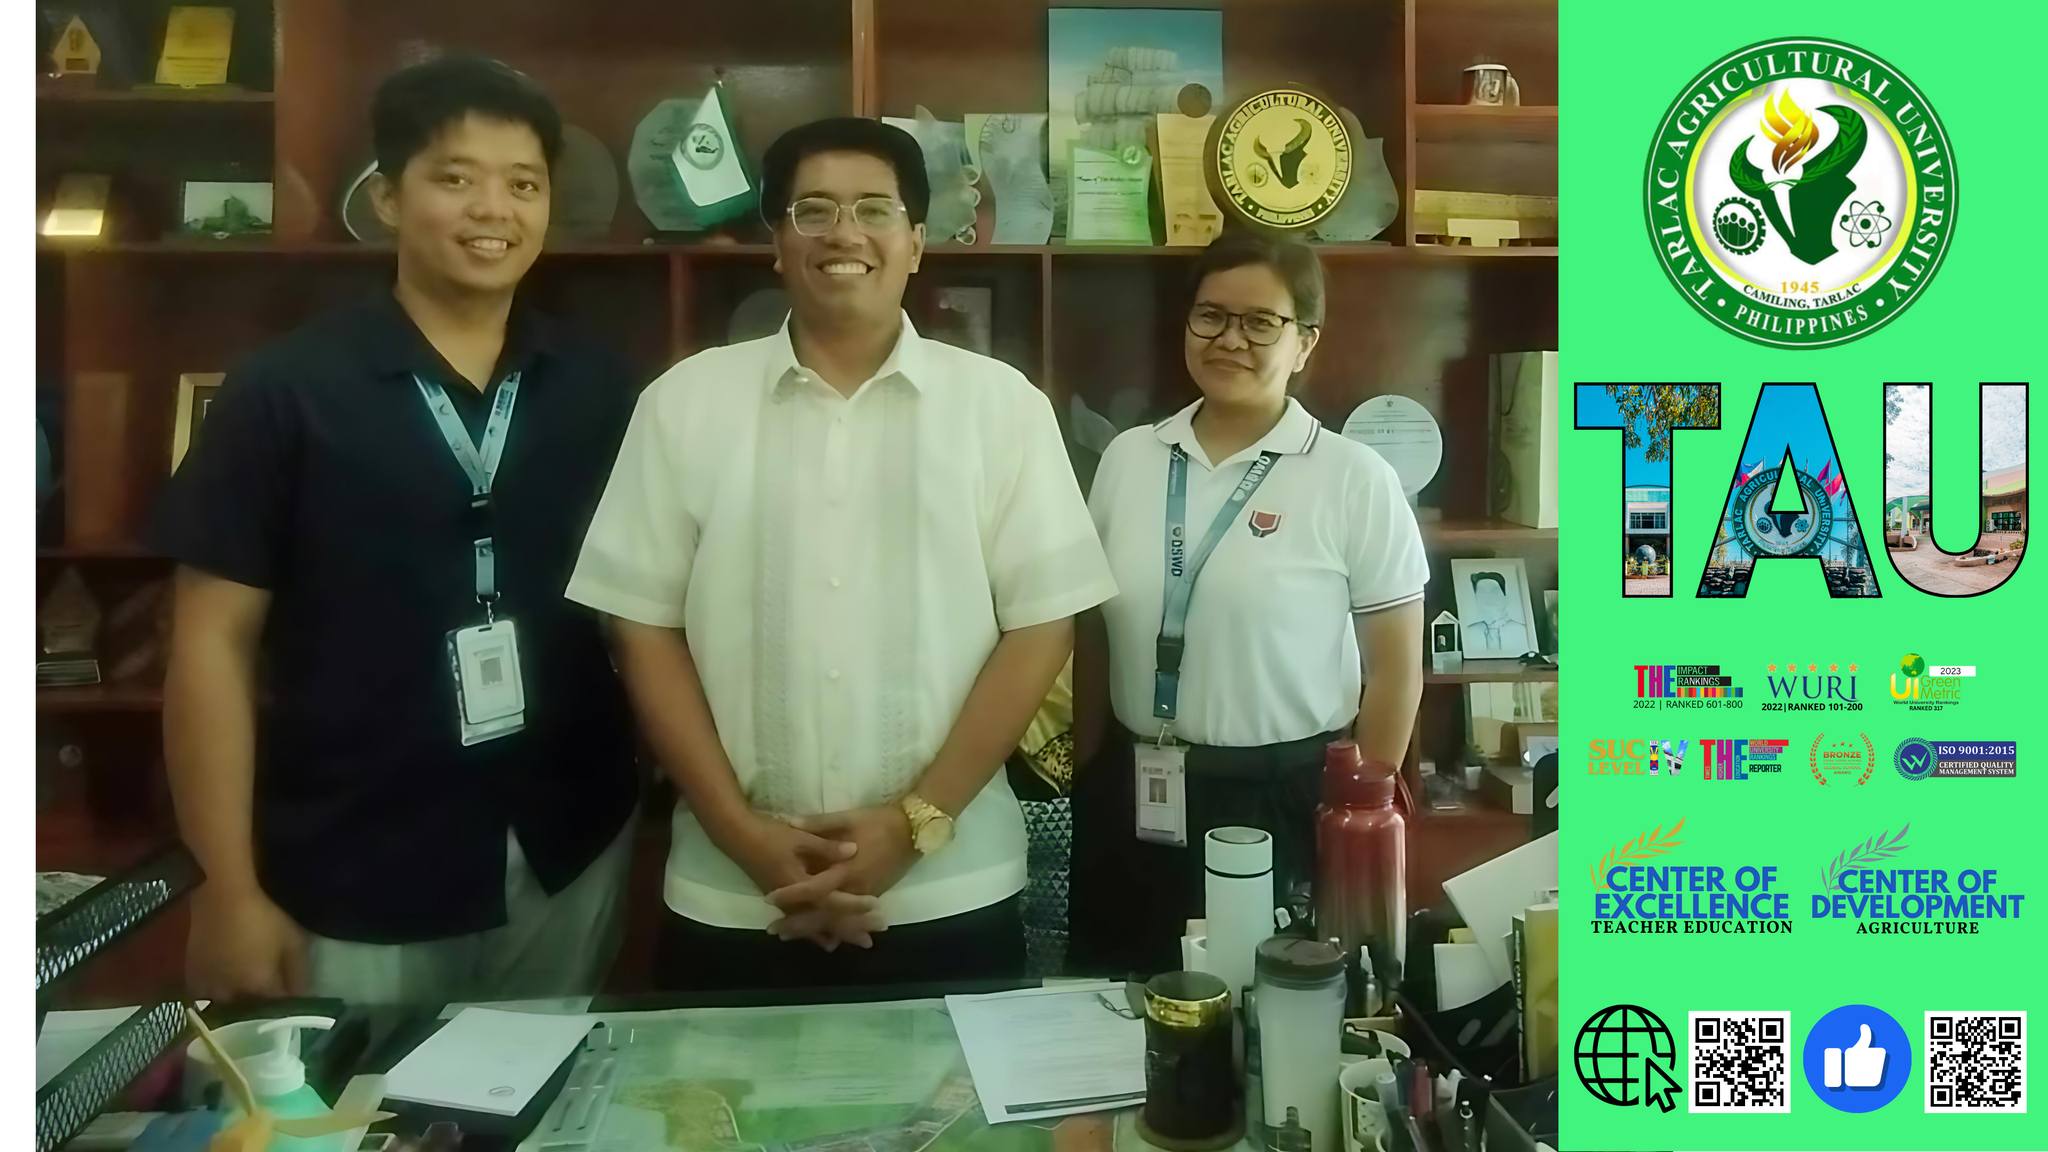 𝐂𝐀𝐏𝐓𝐔𝐑𝐄𝐃 𝐈𝐍 𝐋𝐄𝐍𝐒 | Dr. Silverio Ramon DC. Salunson, Tarlac Agricultural University (TAU) President, welcomes two personnel from the Department of Social Welfare and Development (DSWD) Tarlac Lingap Center, 24 June